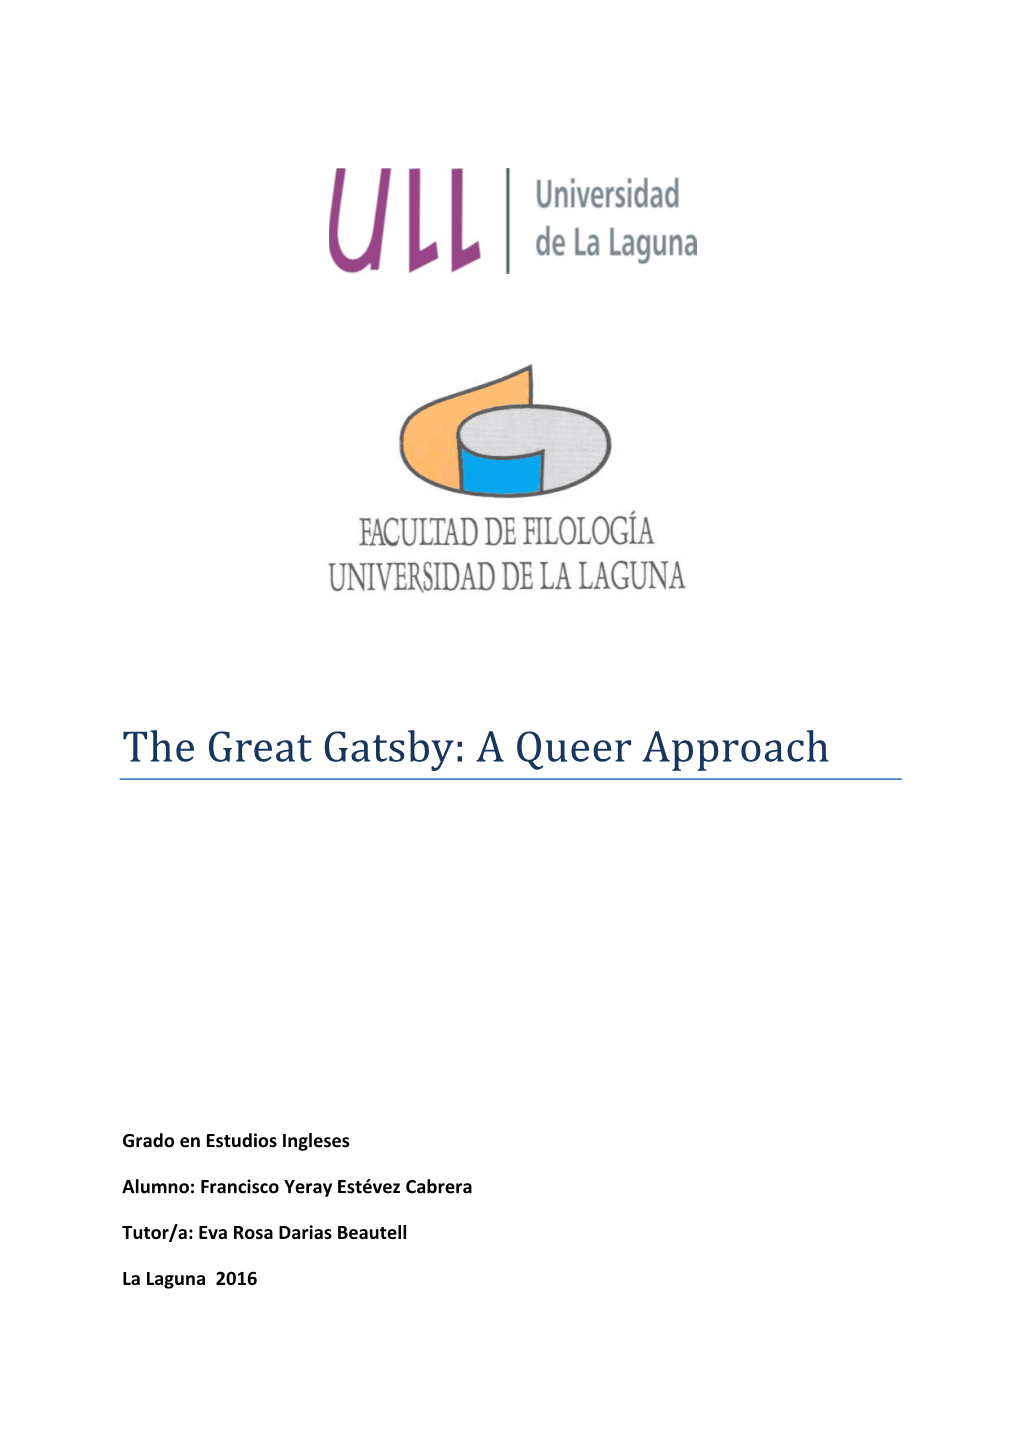 The Great Gatsby: a Queer Approach